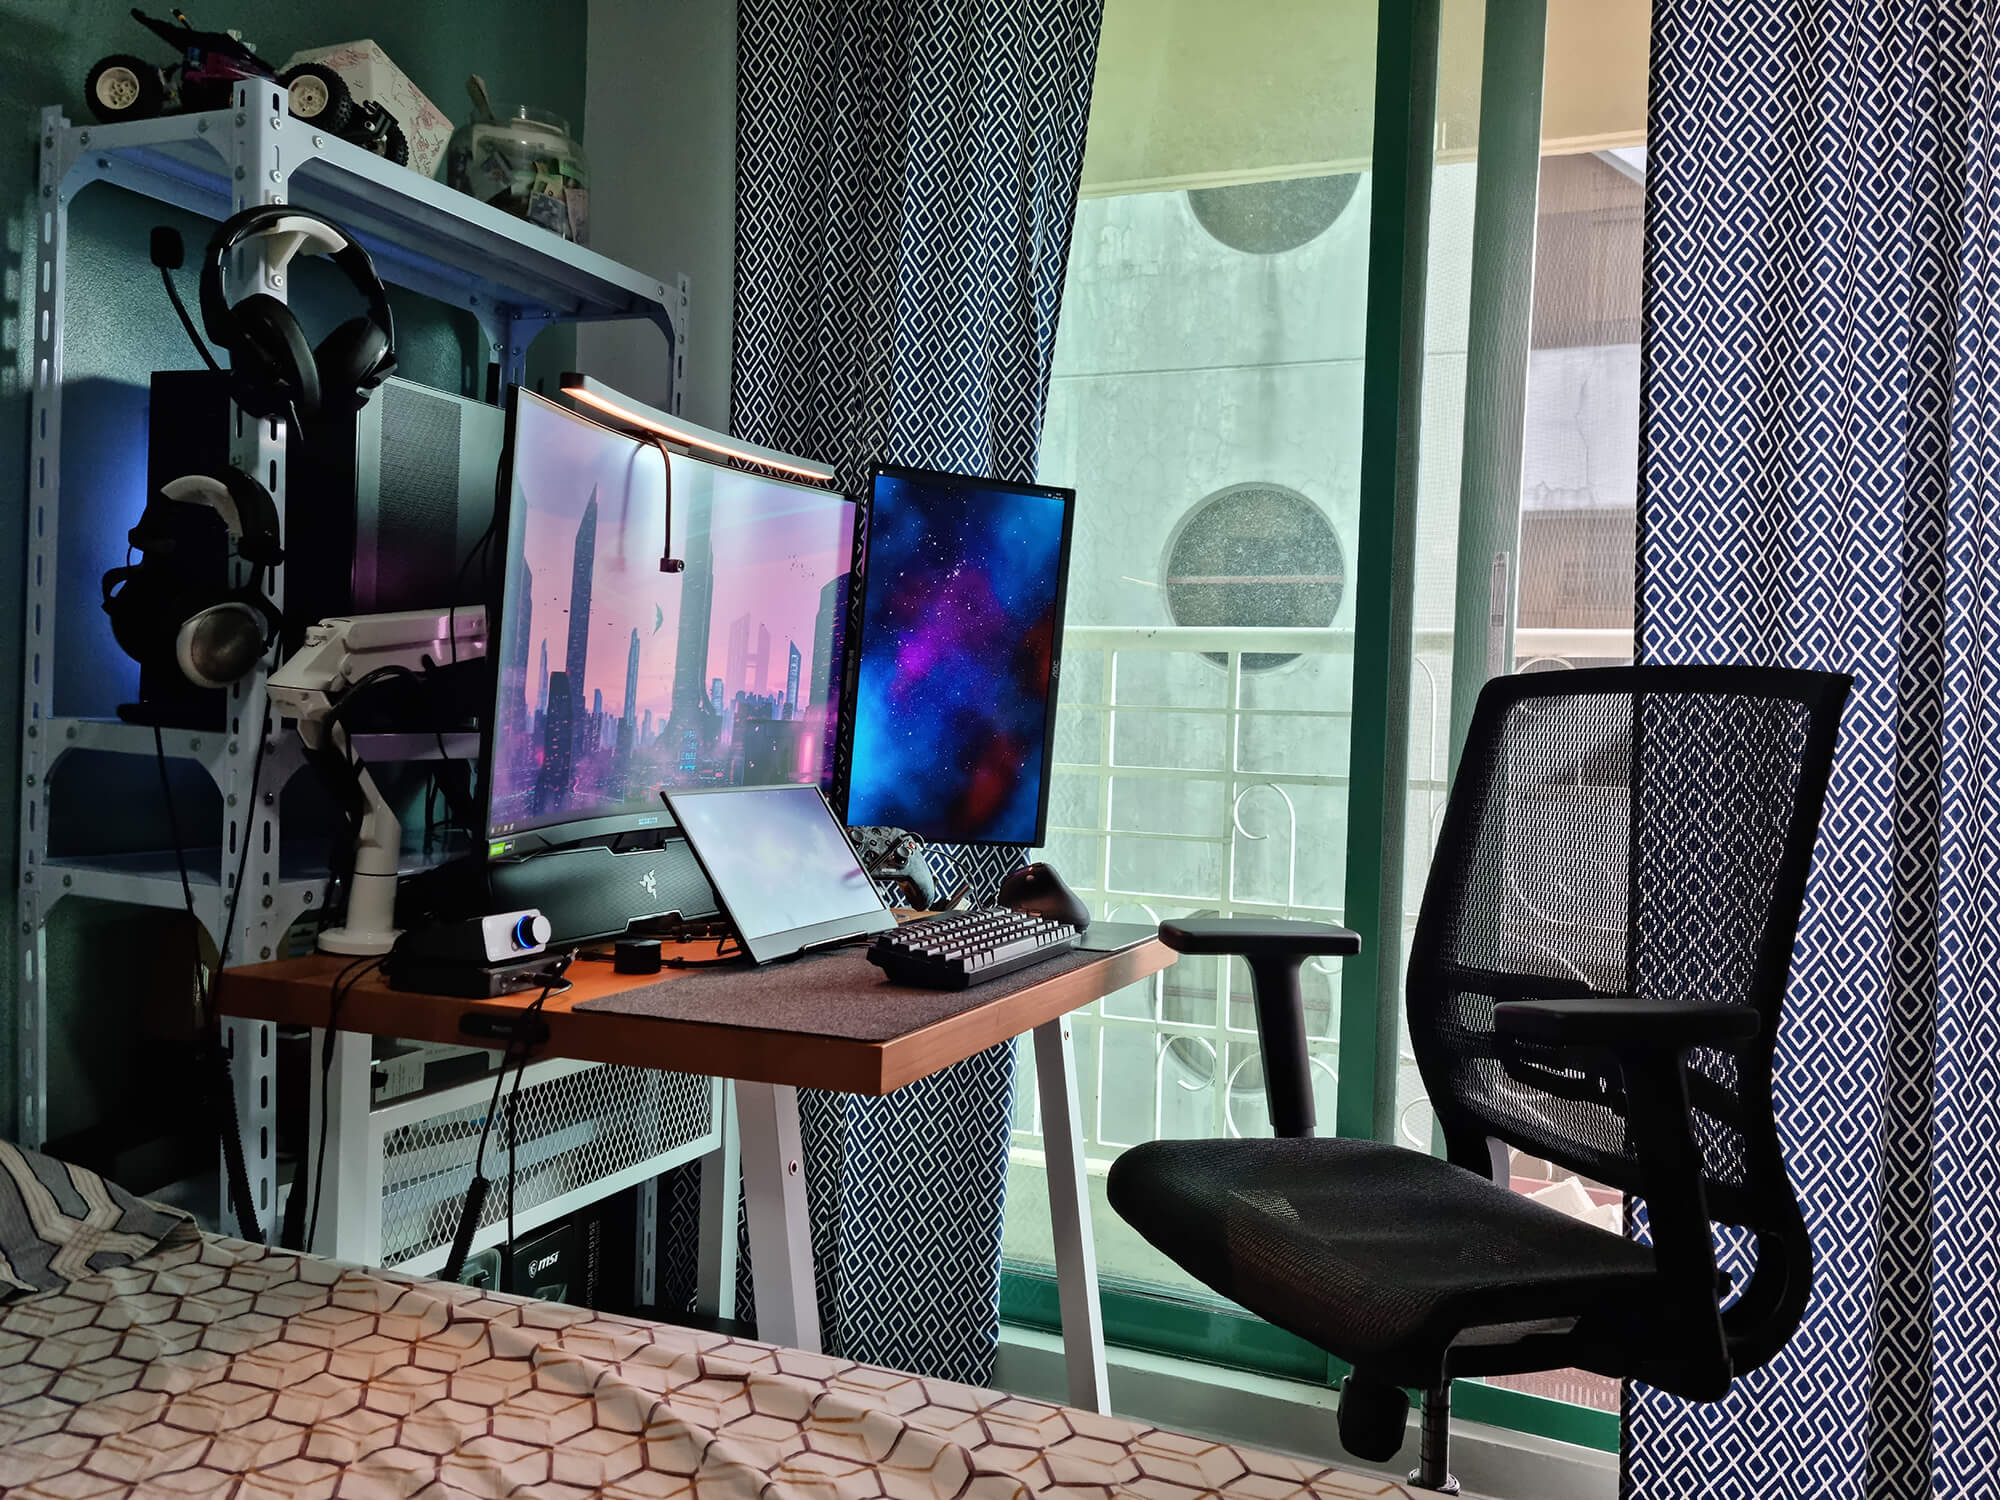 PJ’s small space desk setup in the Philippines